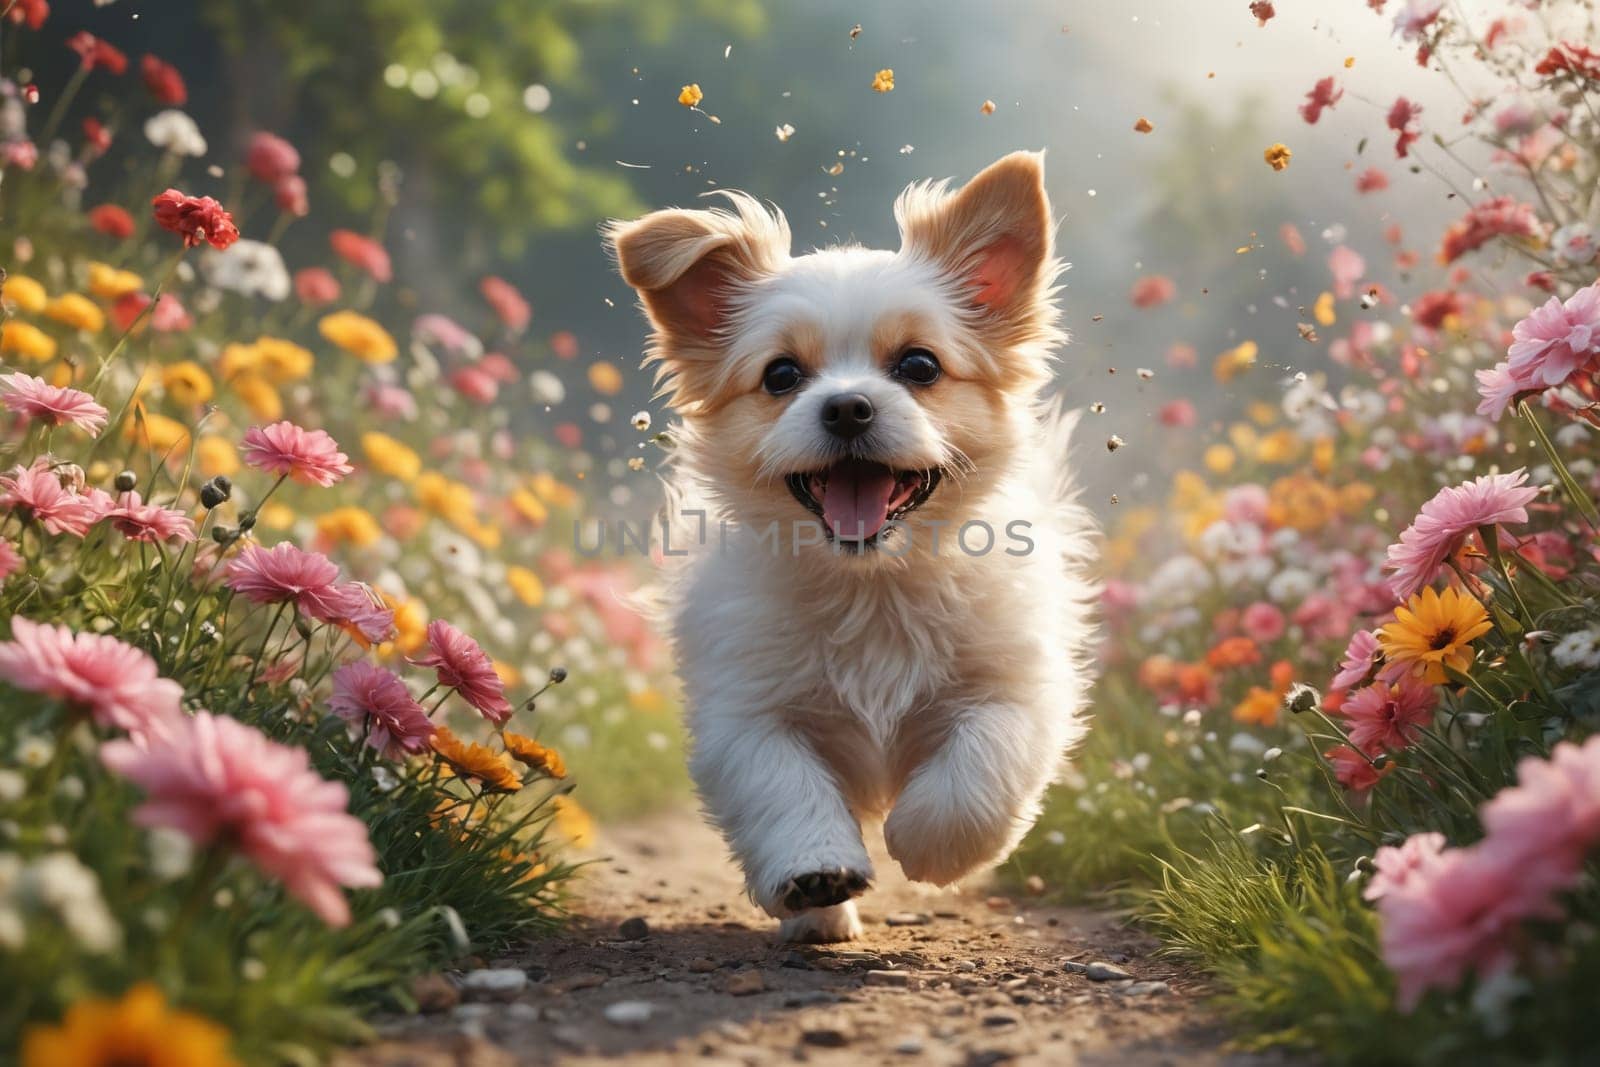 Sunshine, petals, and a dog in motion enjoy the simple pleasures of a garden romp.